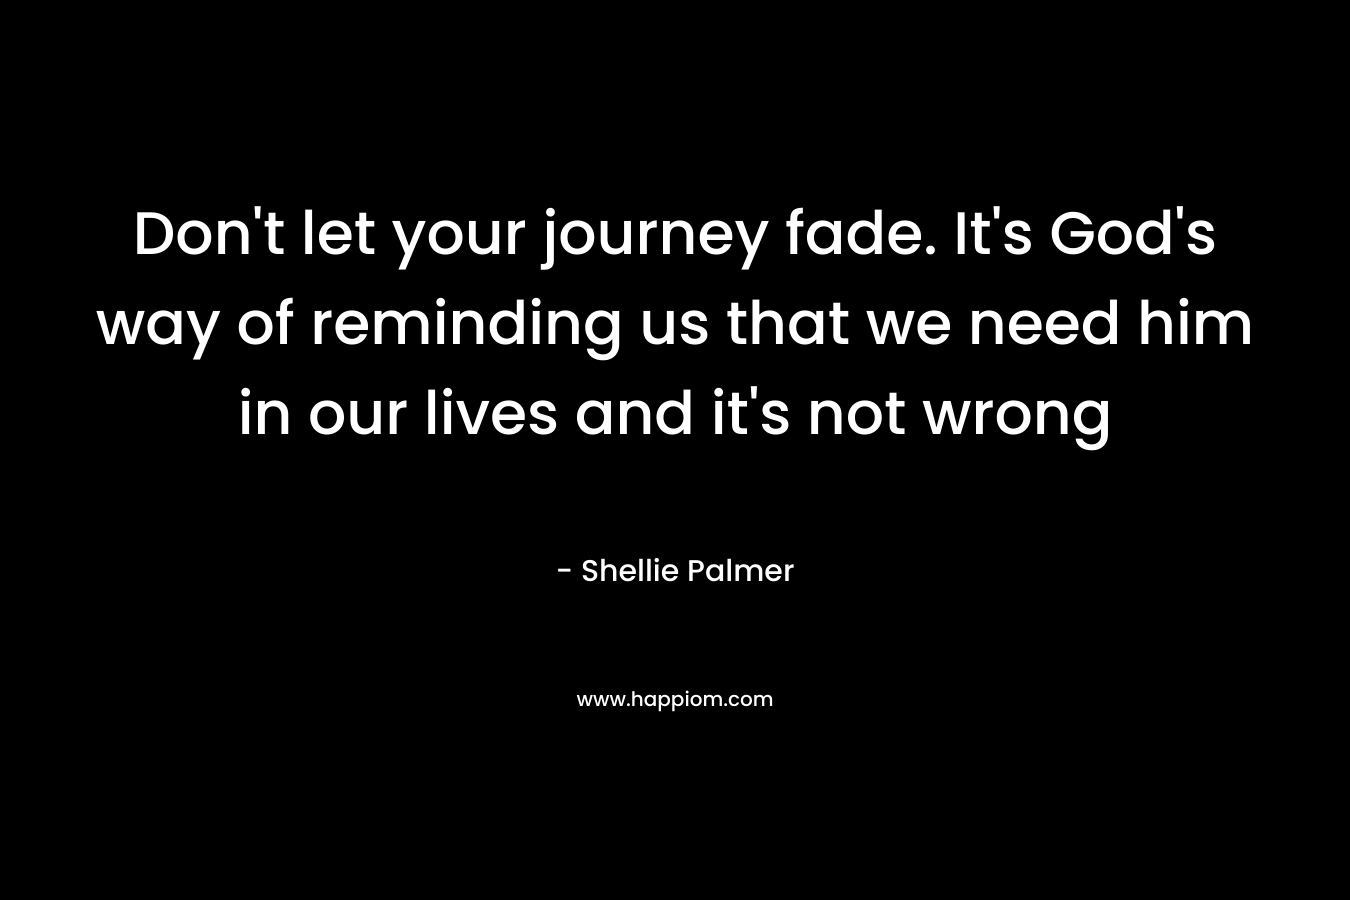 Don’t let your journey fade. It’s God’s way of reminding us that we need him in our lives and it’s not wrong – Shellie Palmer